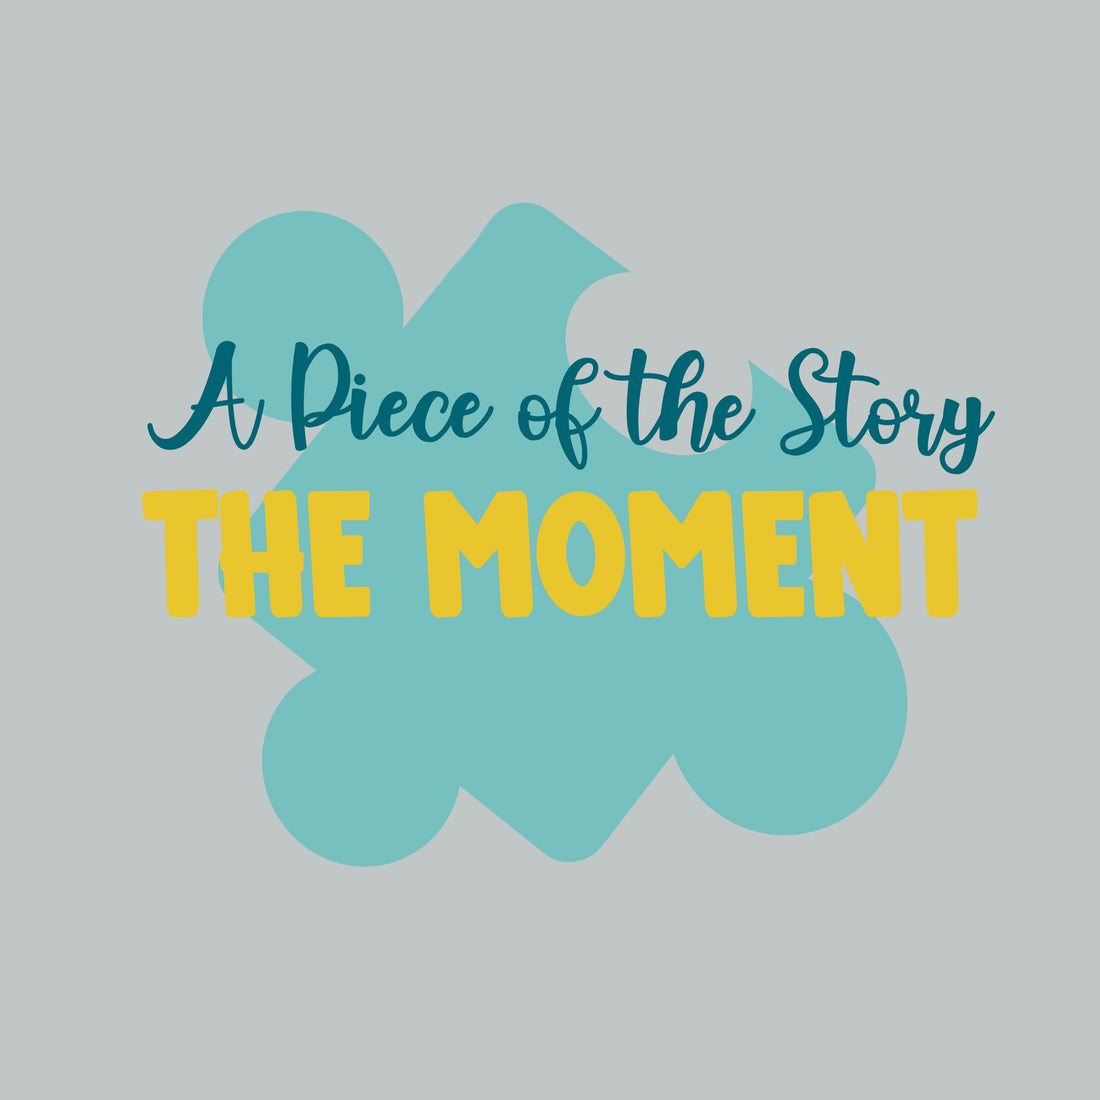 A piece of the story: THE moment